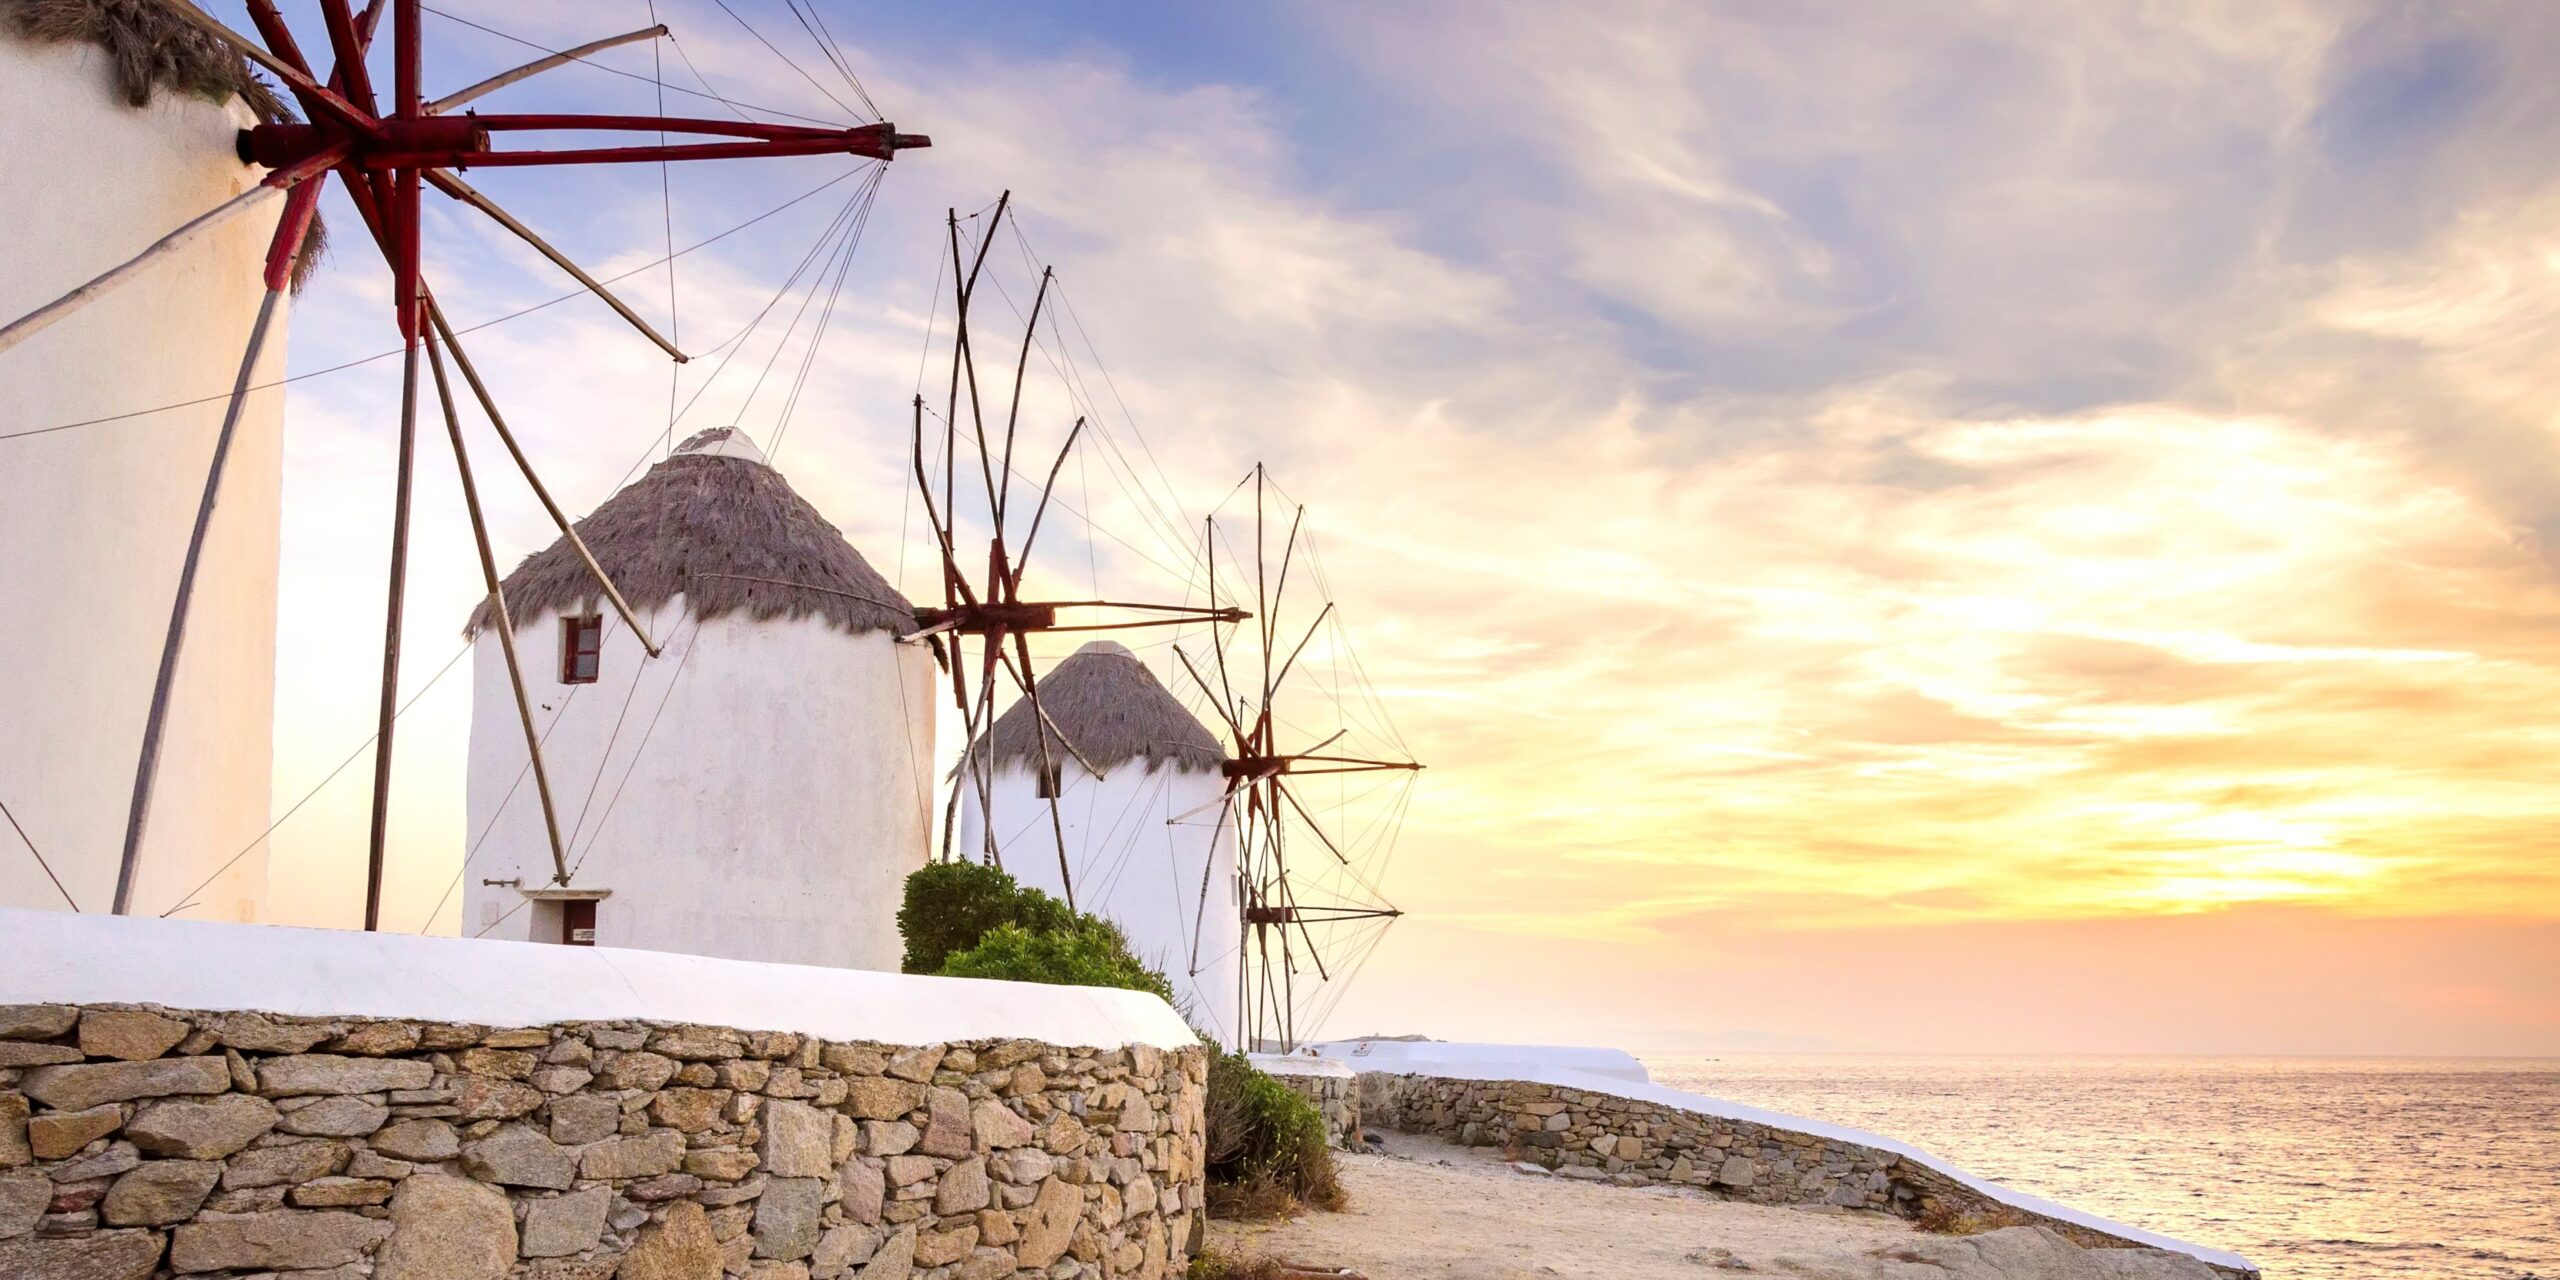 The iconic Mykonos windmills bask in the warm glow of the setting sun, creating a picture-perfect end to the day.